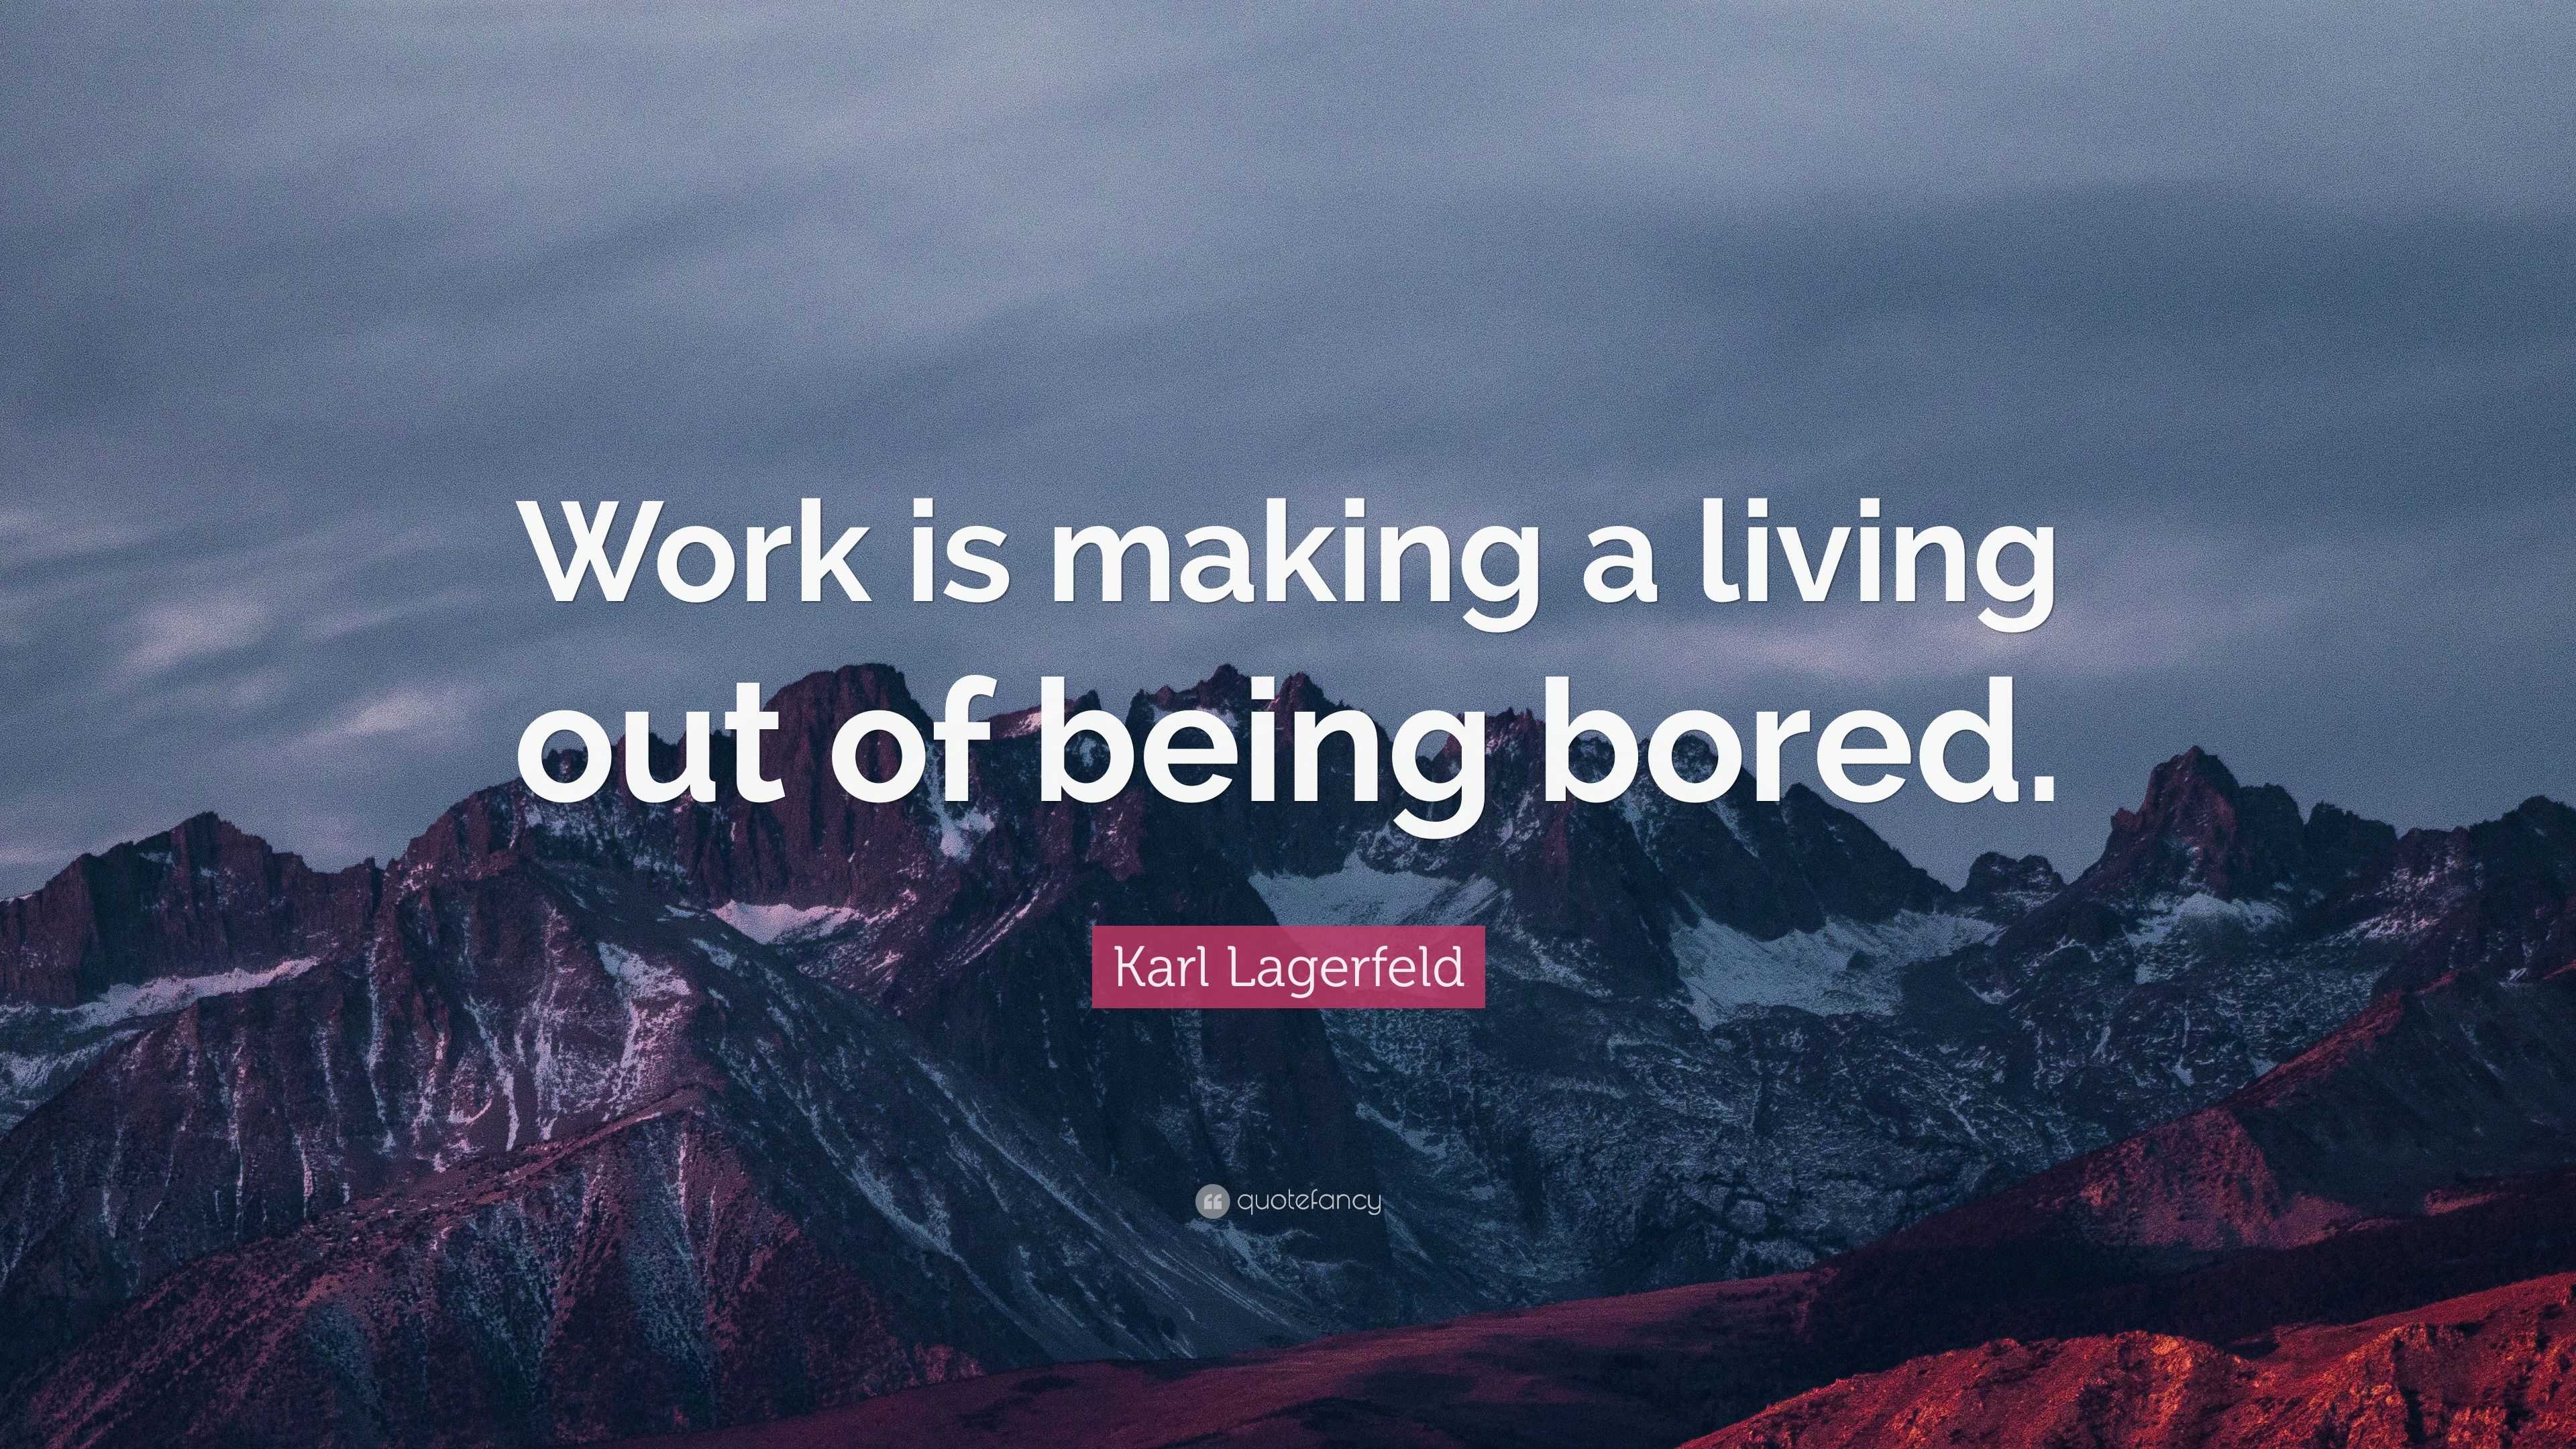 Work is making a living out of being bored”: 30 memorable quotes